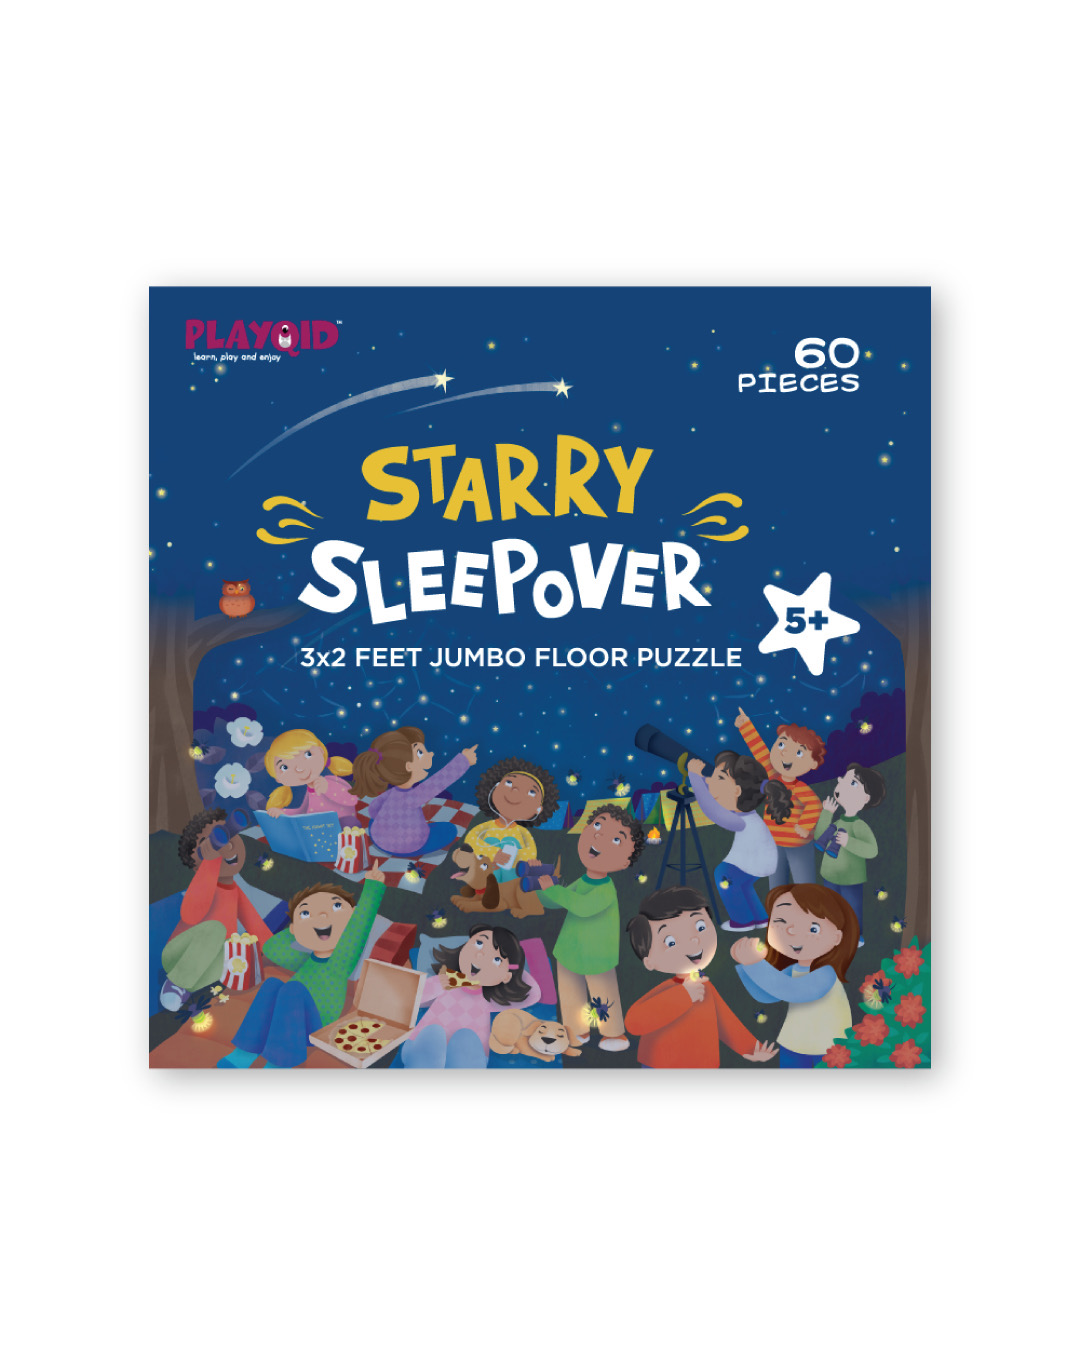 Playqid Starry Sleepover Jumbo Giant Jigsaw Floor Puzzle 60 Huge Piece Puzzle For Kids Age 4 And Above Size 91.4 X 60.9 - Cm (3 Ft X 2 Ft)